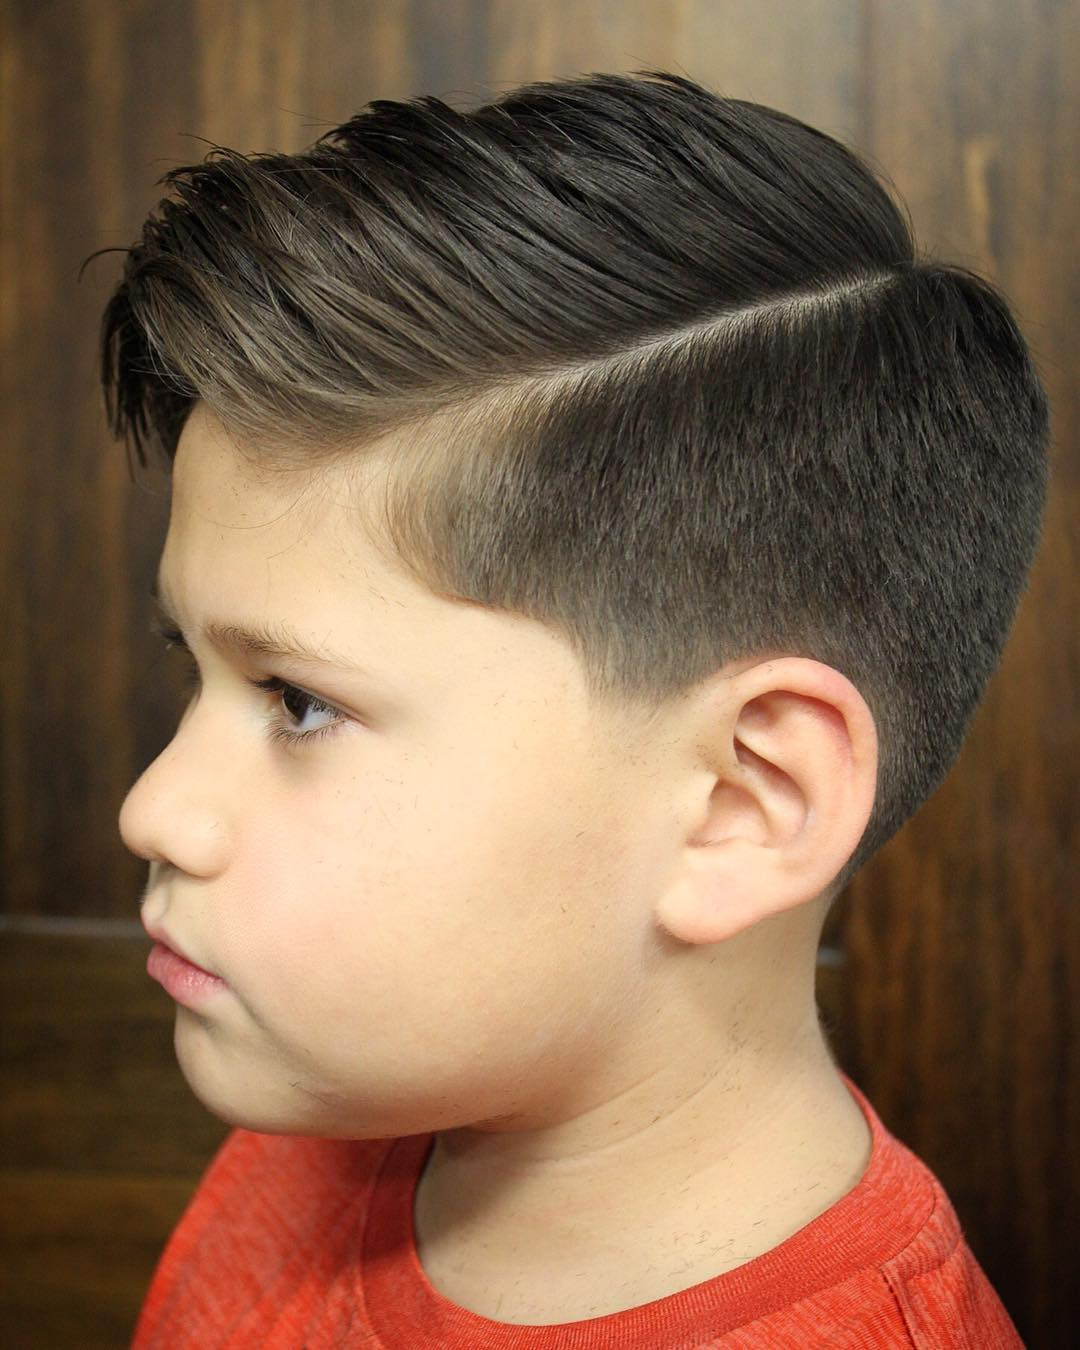 How To Cut Kids Hair
 90 Cool Haircuts for Kids for 2019